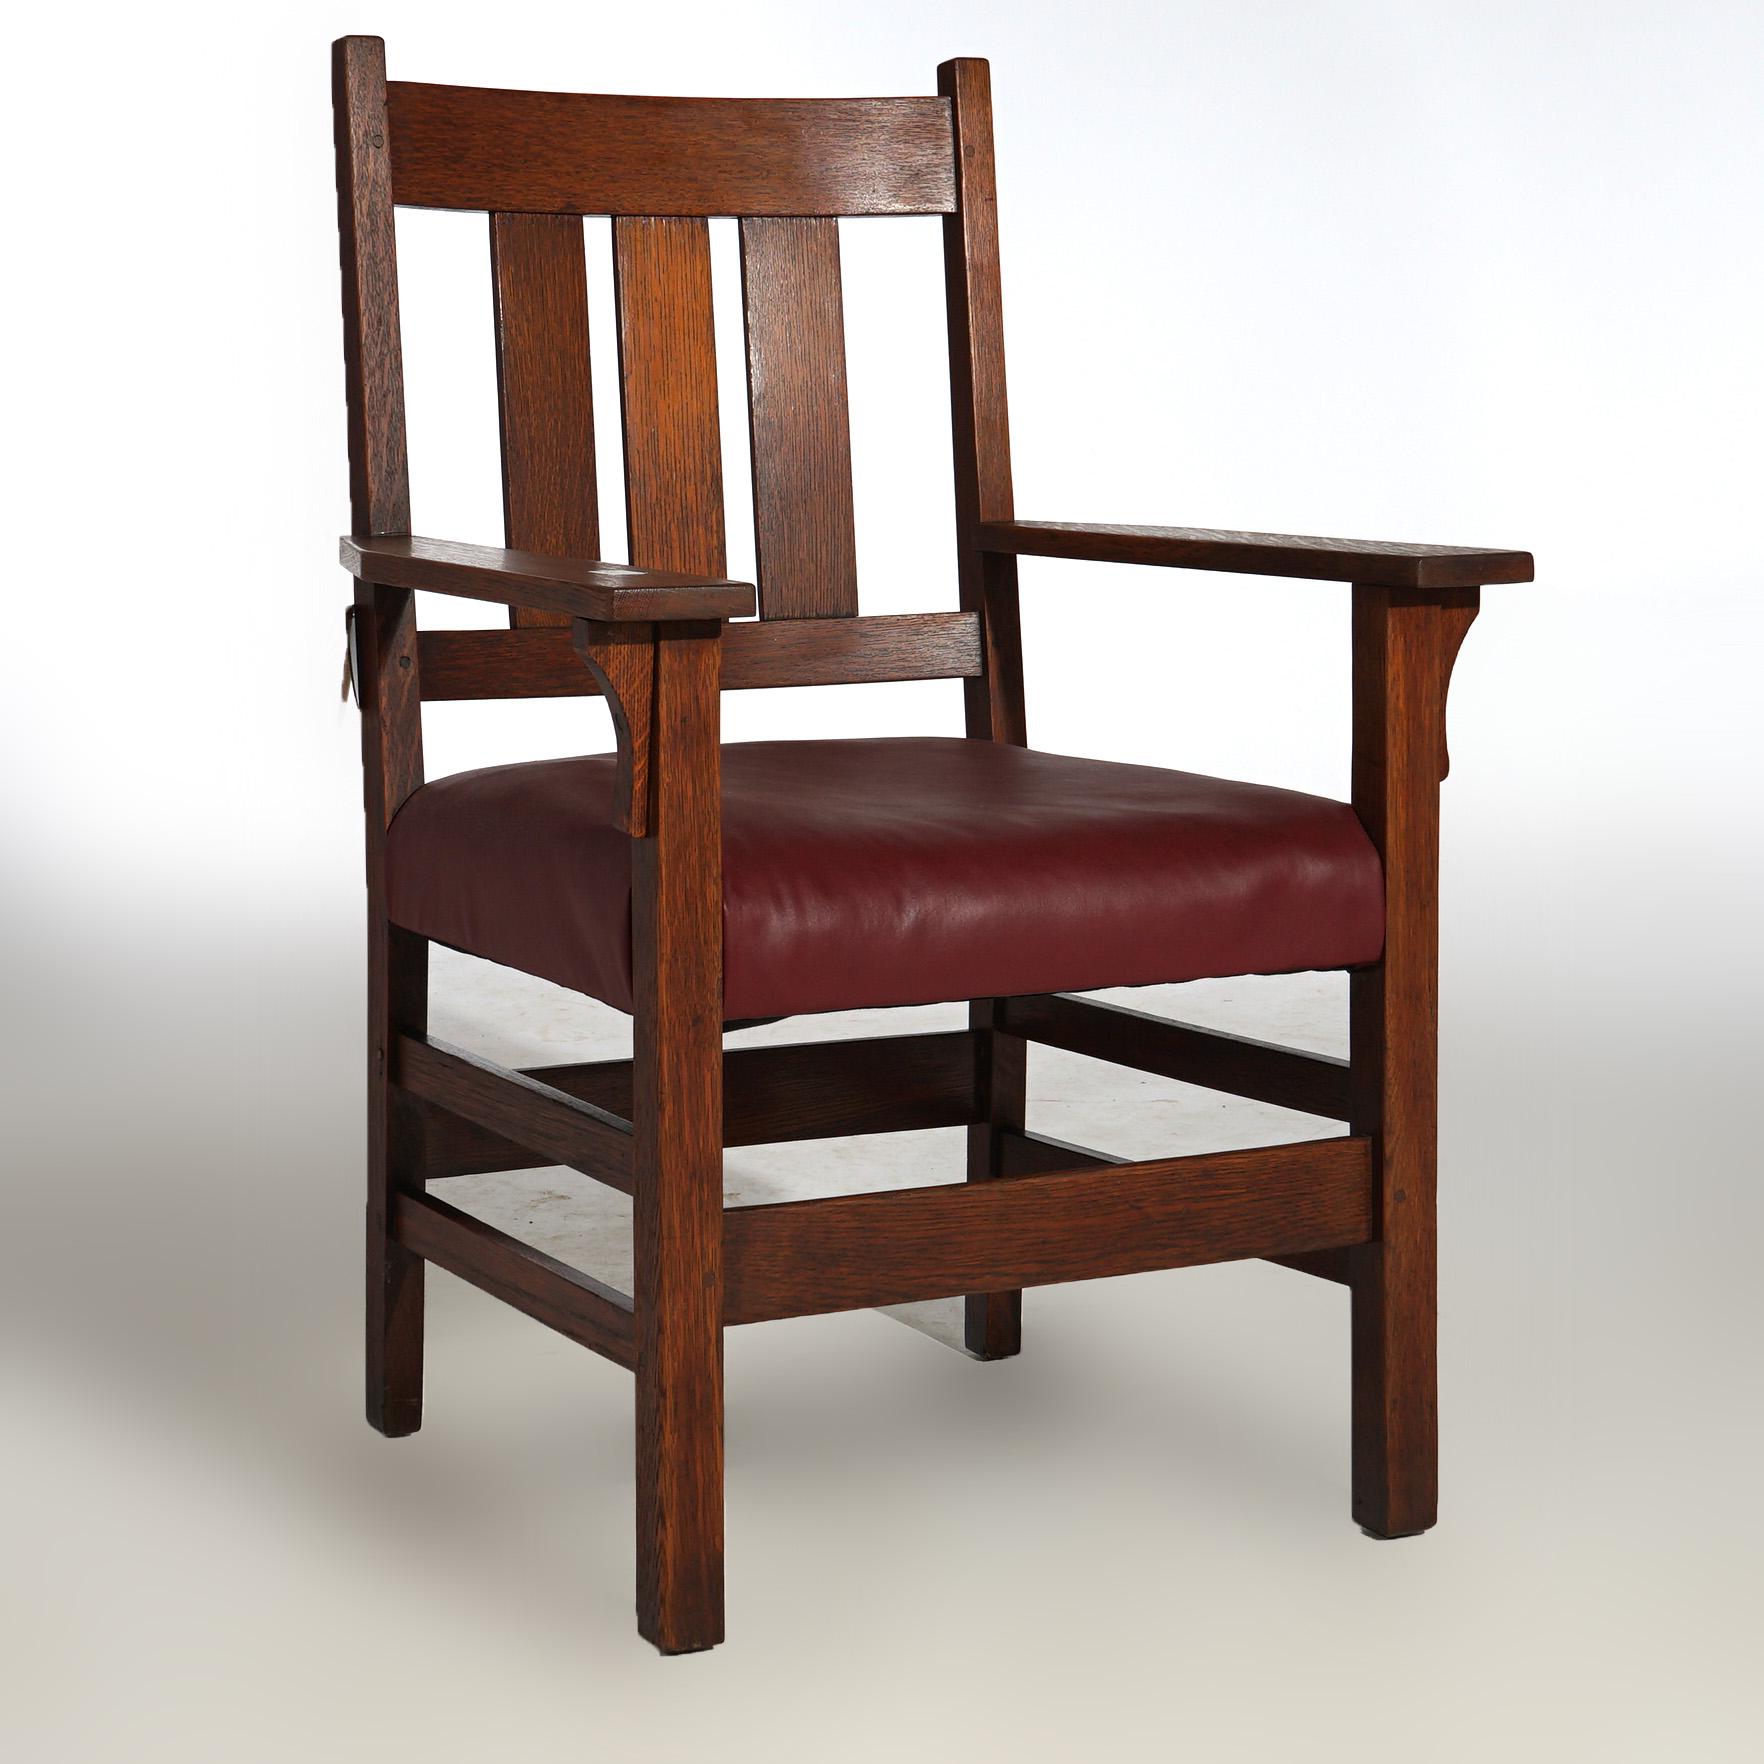 An antique Arts and Craft armchair by Gustav Stickley offers oak construction with slat back, signed, c1910

Measures - 38.75